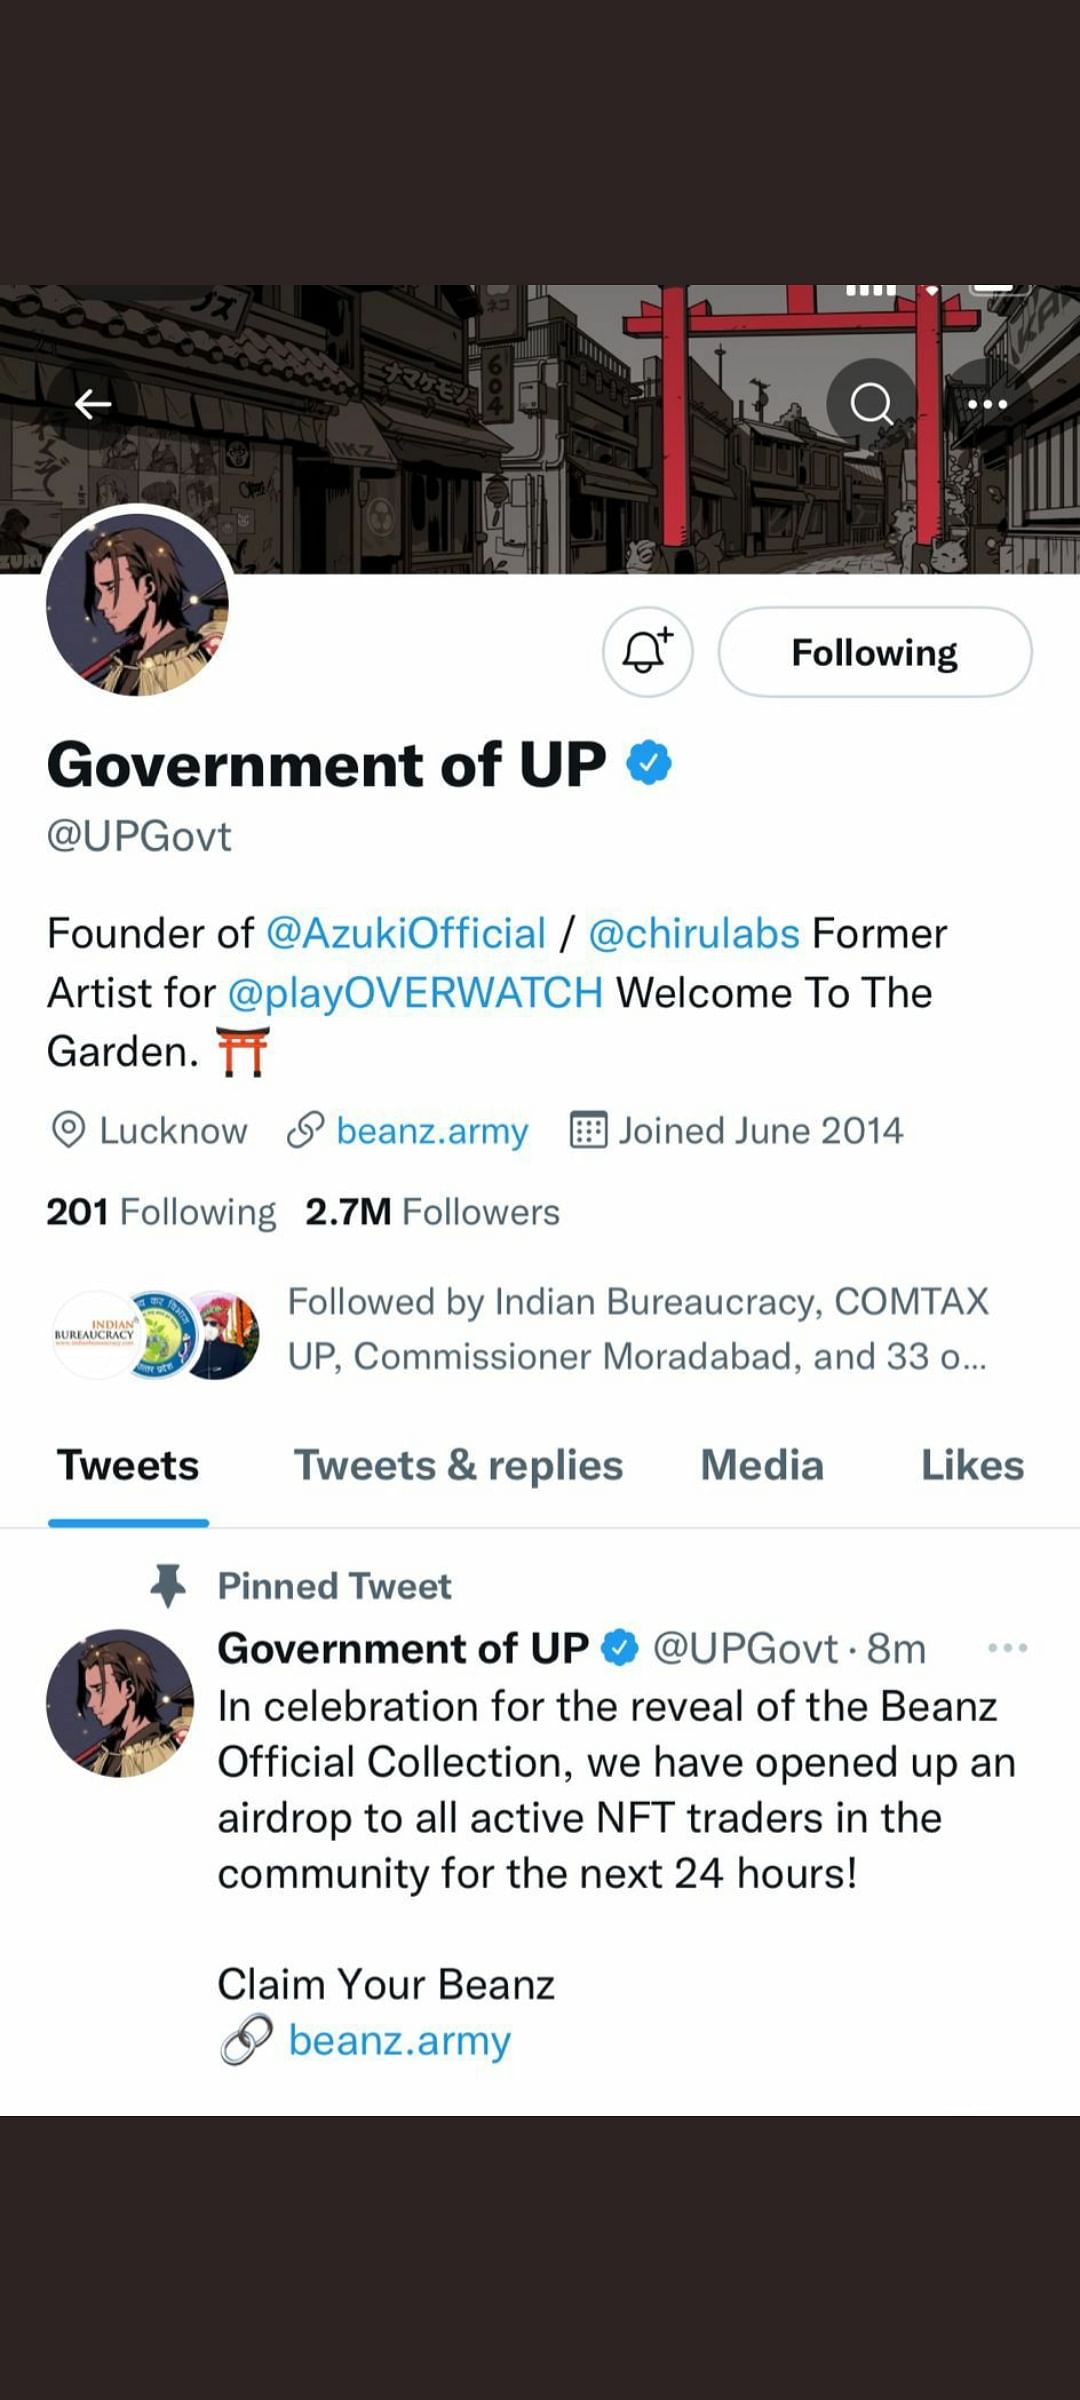 This comes two days after the official Twitter account of UP Chief Minister Yogi Adityanath was hacked.